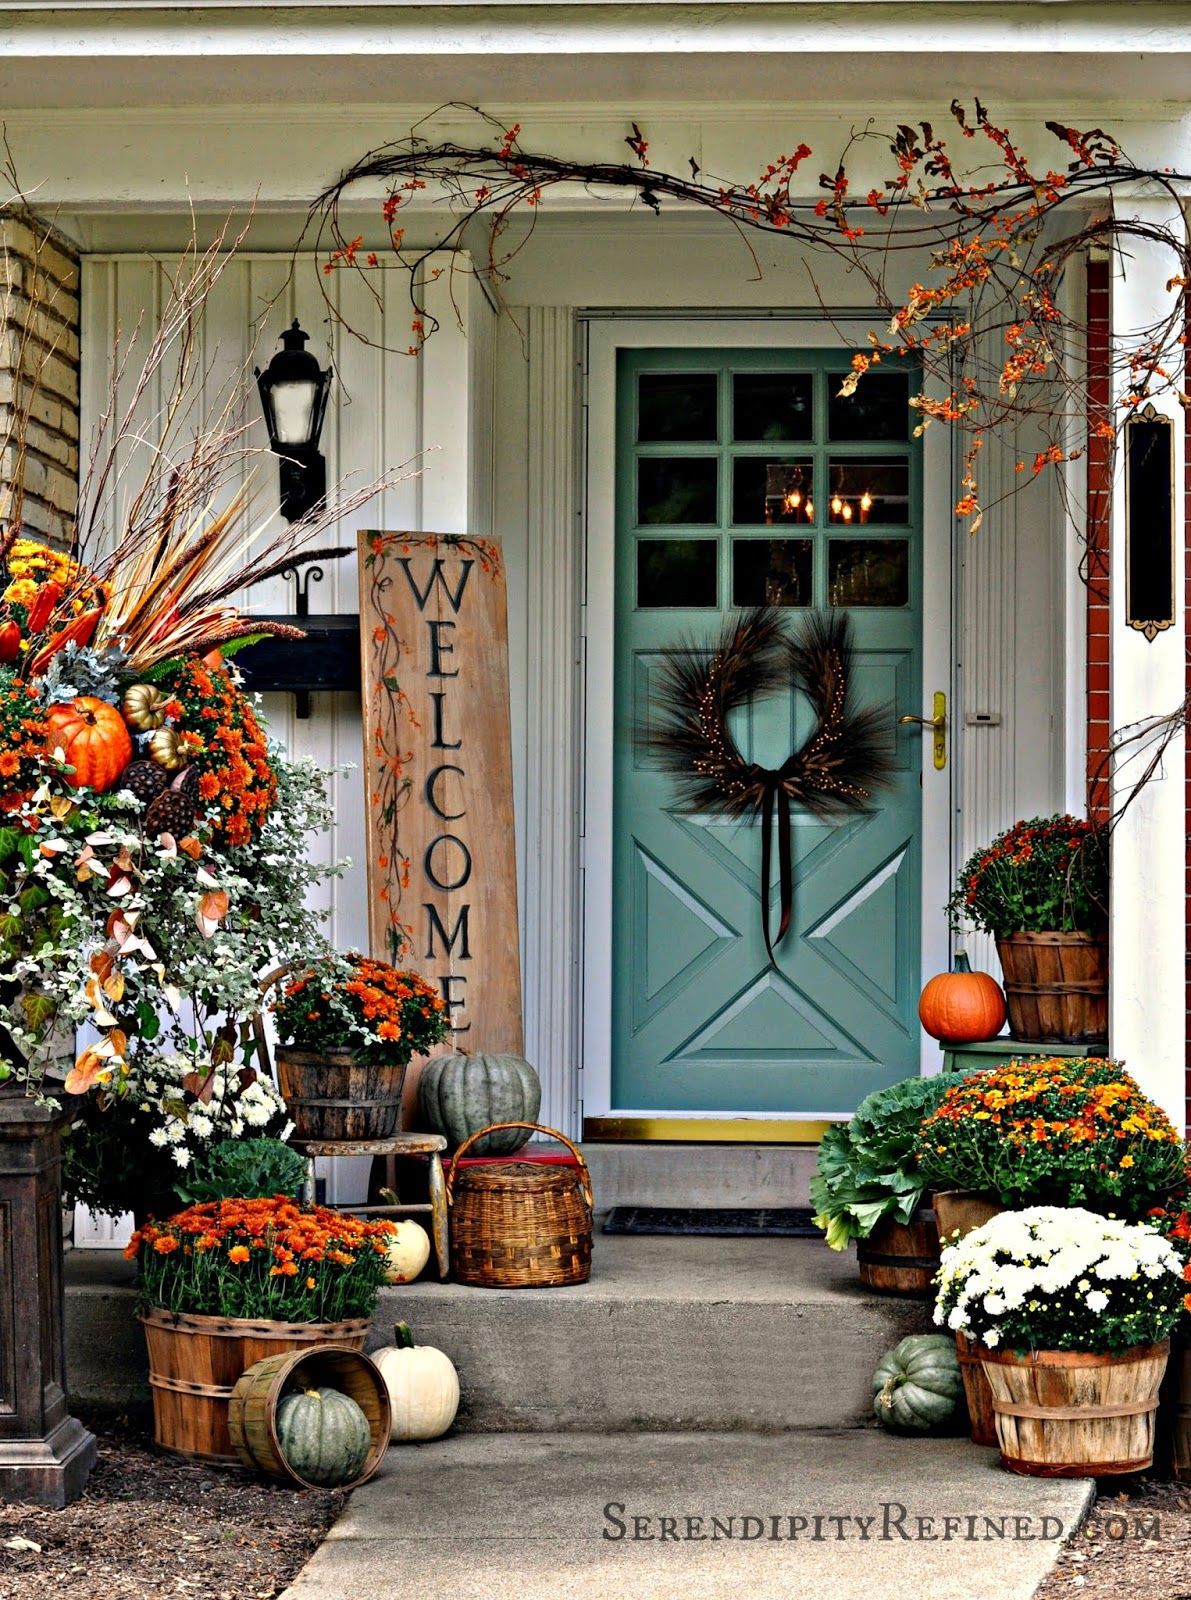 Serendipity Refined: Fall Harvest Porch Decor with Reclaimed Wood Sign